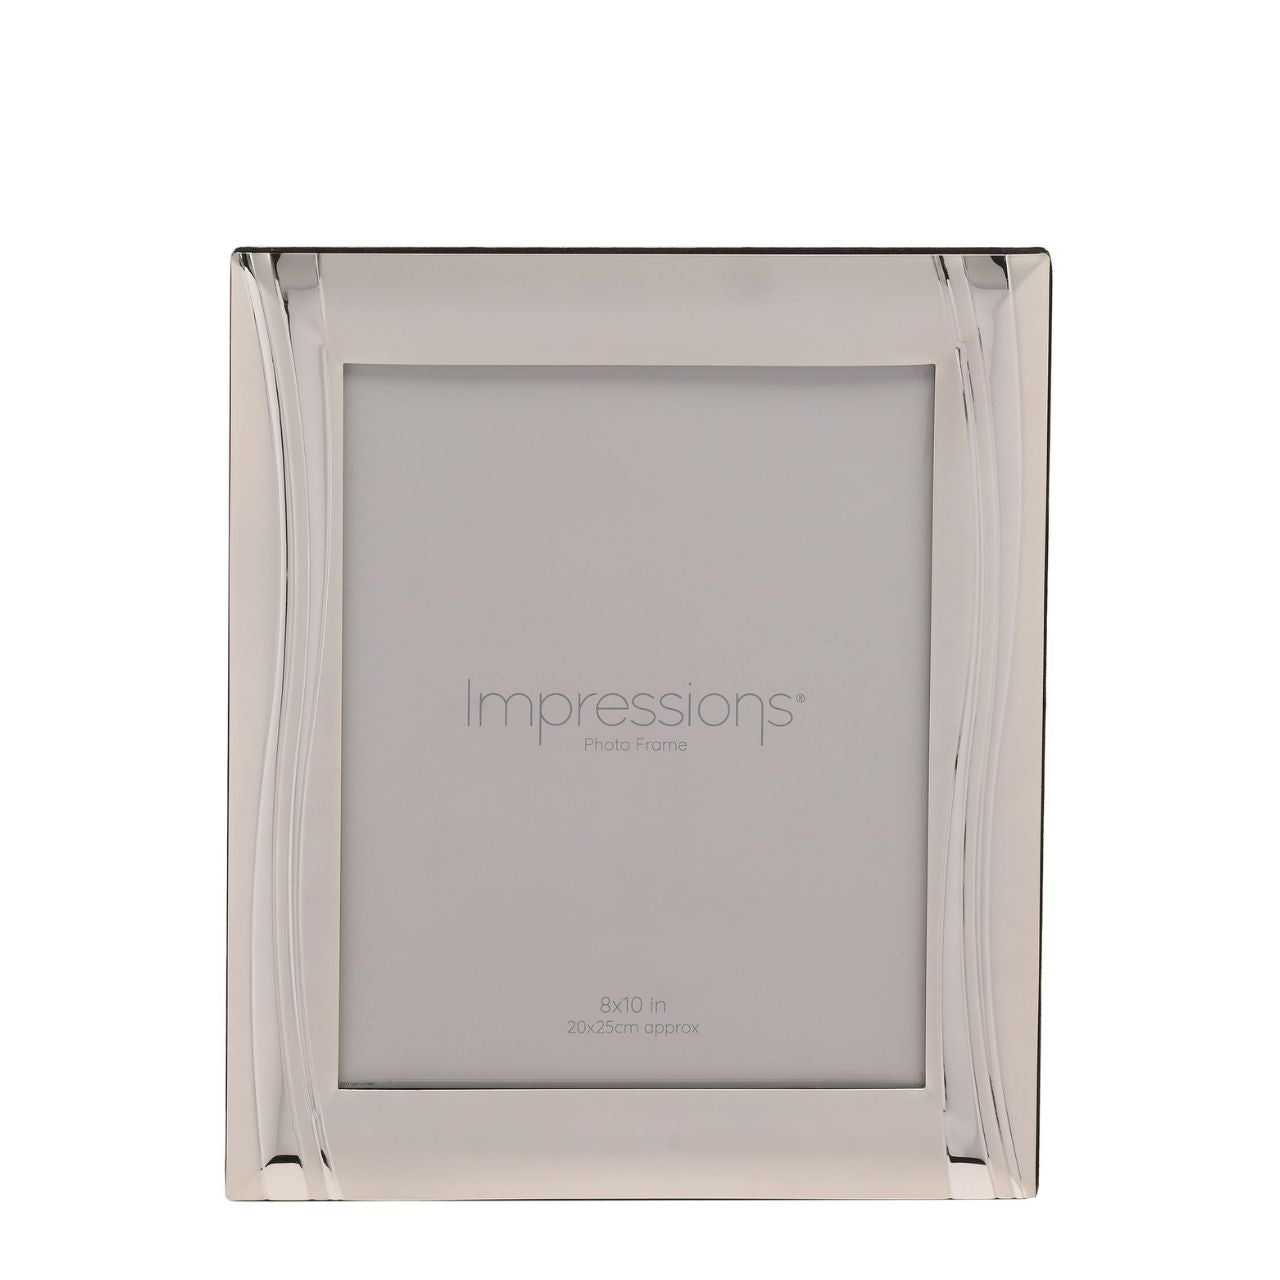 Add a personal touch to any space with this beautiful photo frame.  With a stunning shiny wave design, this looks striking in a modern home.